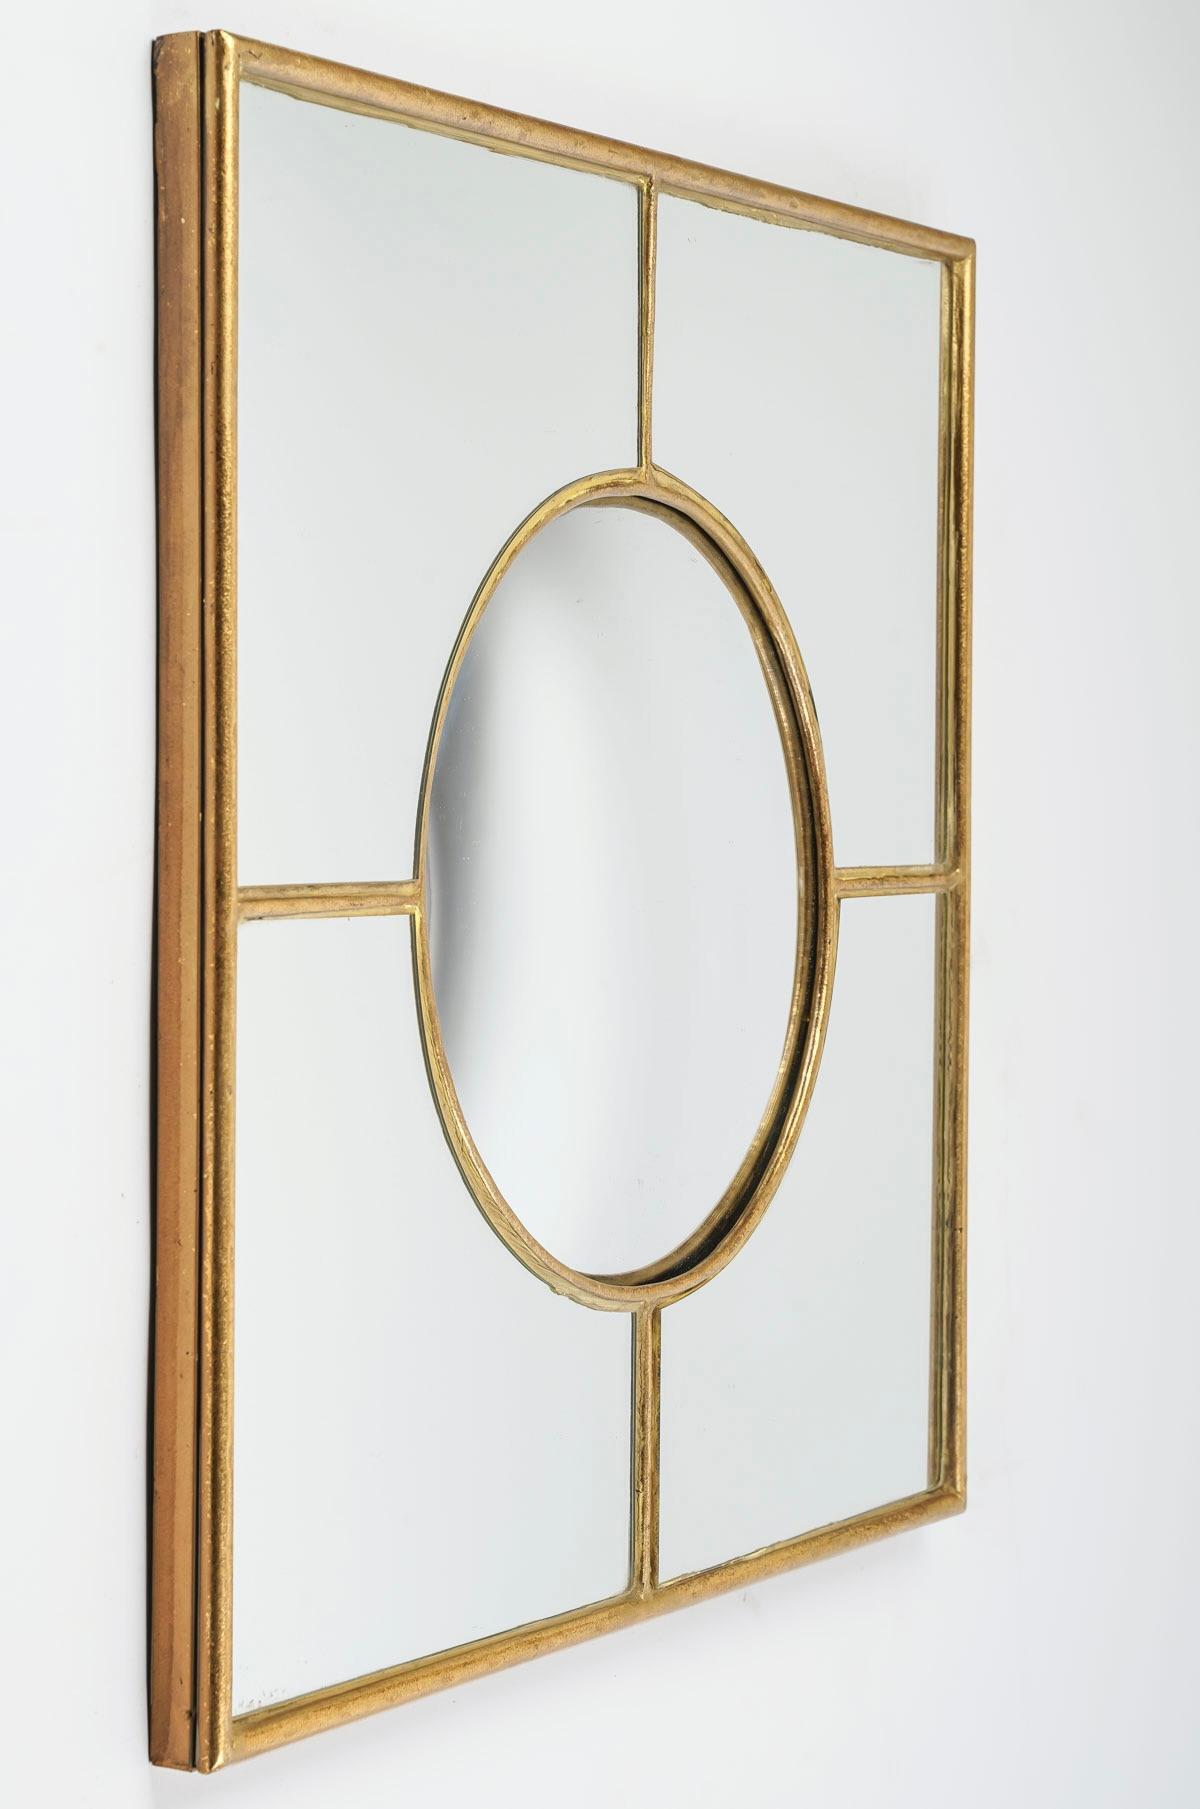 1968 Pair of Maison Roche Witch Mirrors In Good Condition For Sale In Saint-Ouen, FR